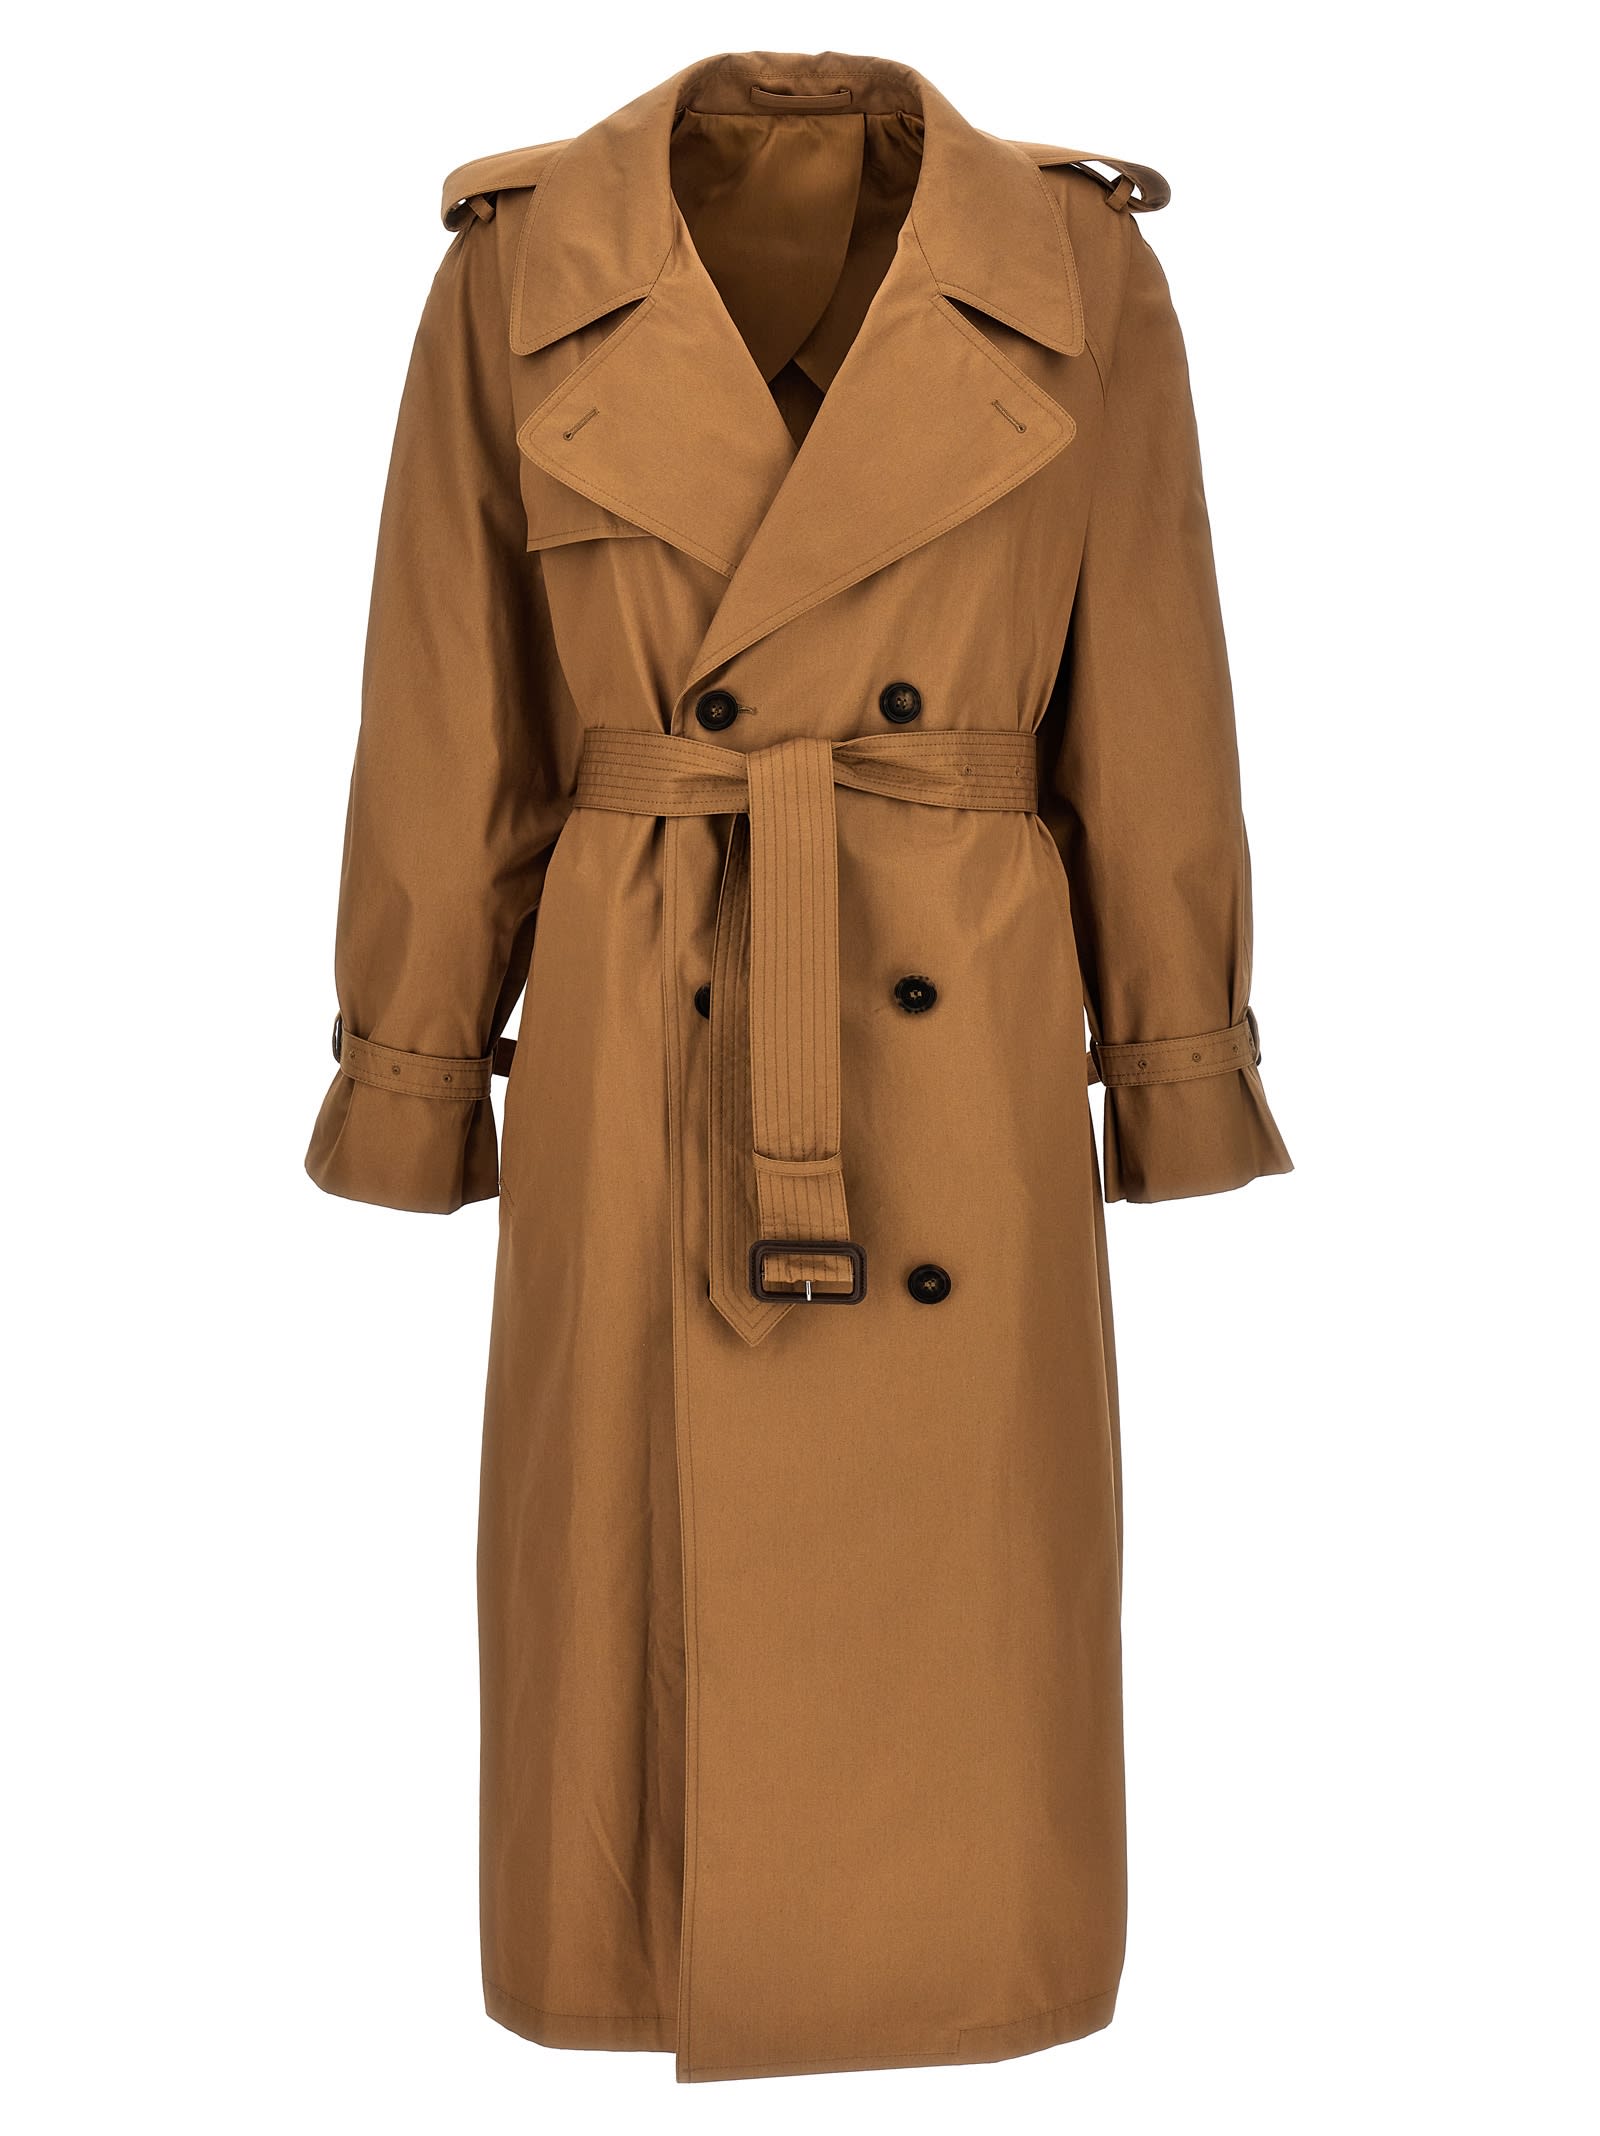 WARDROBE.NYC DOUBLE-BREASTED TRENCH COAT